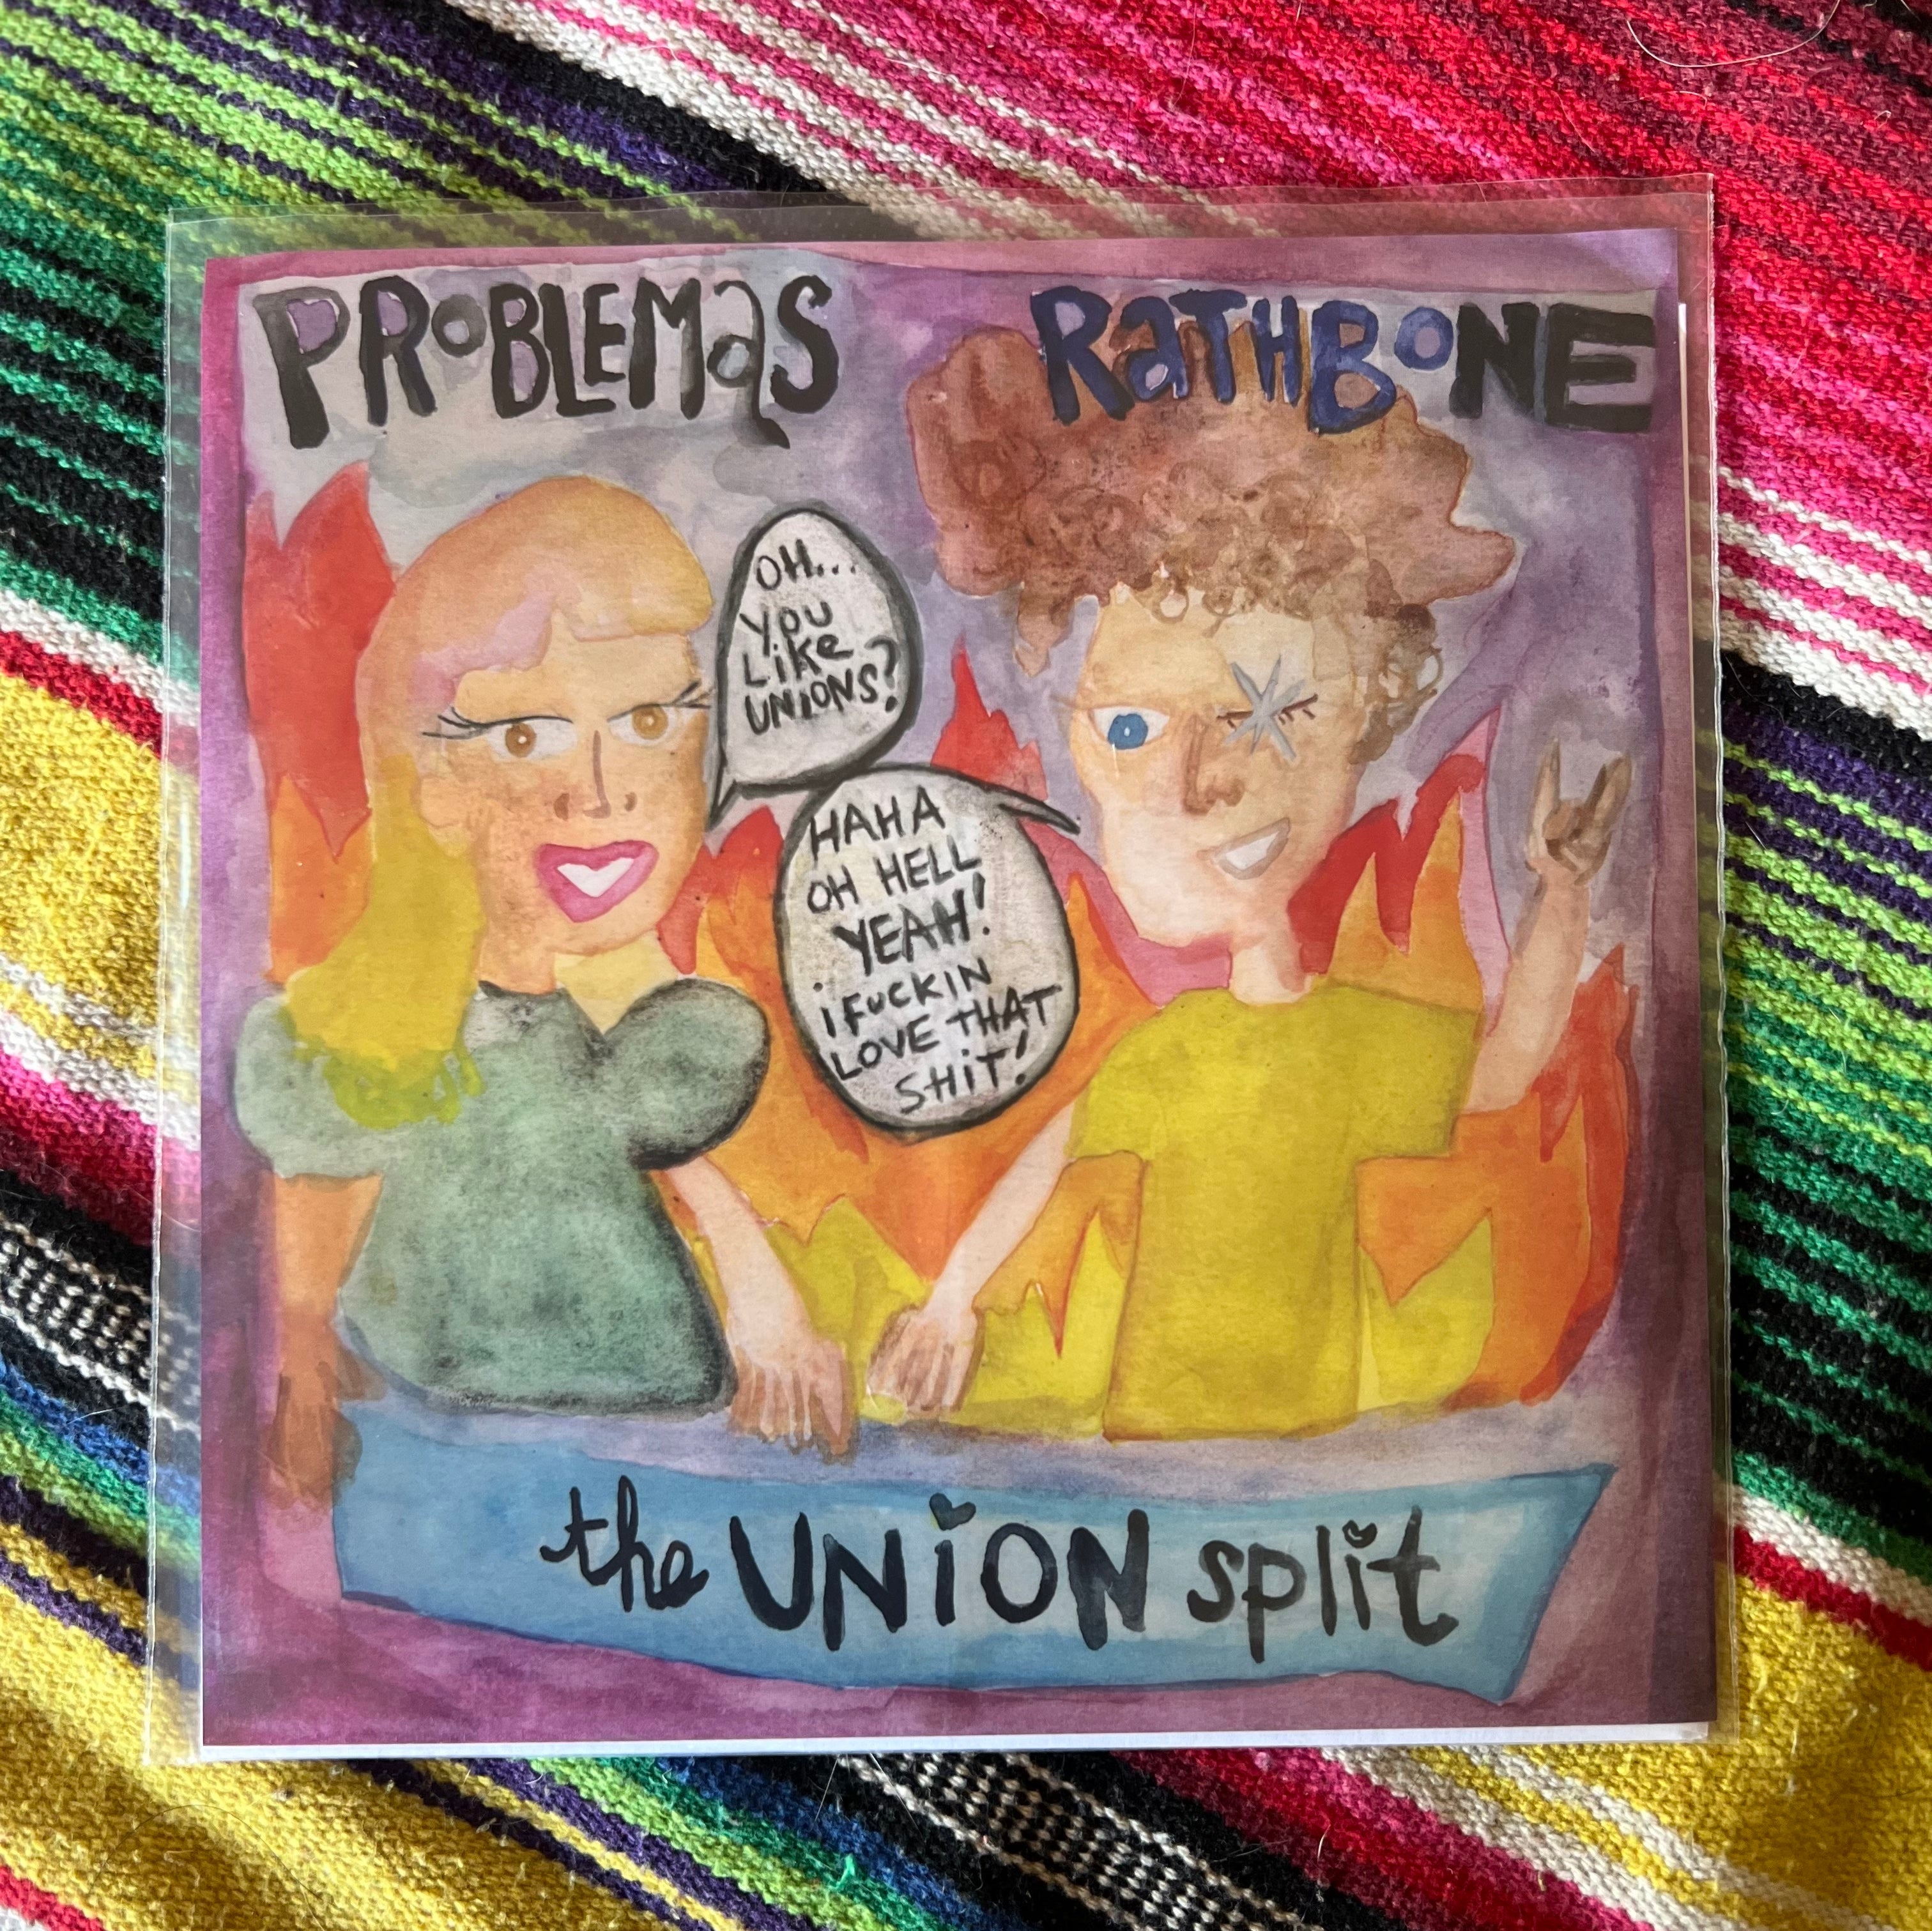 problemas / rathbone - the union split • LIMITED to 50 7" clear vinyl